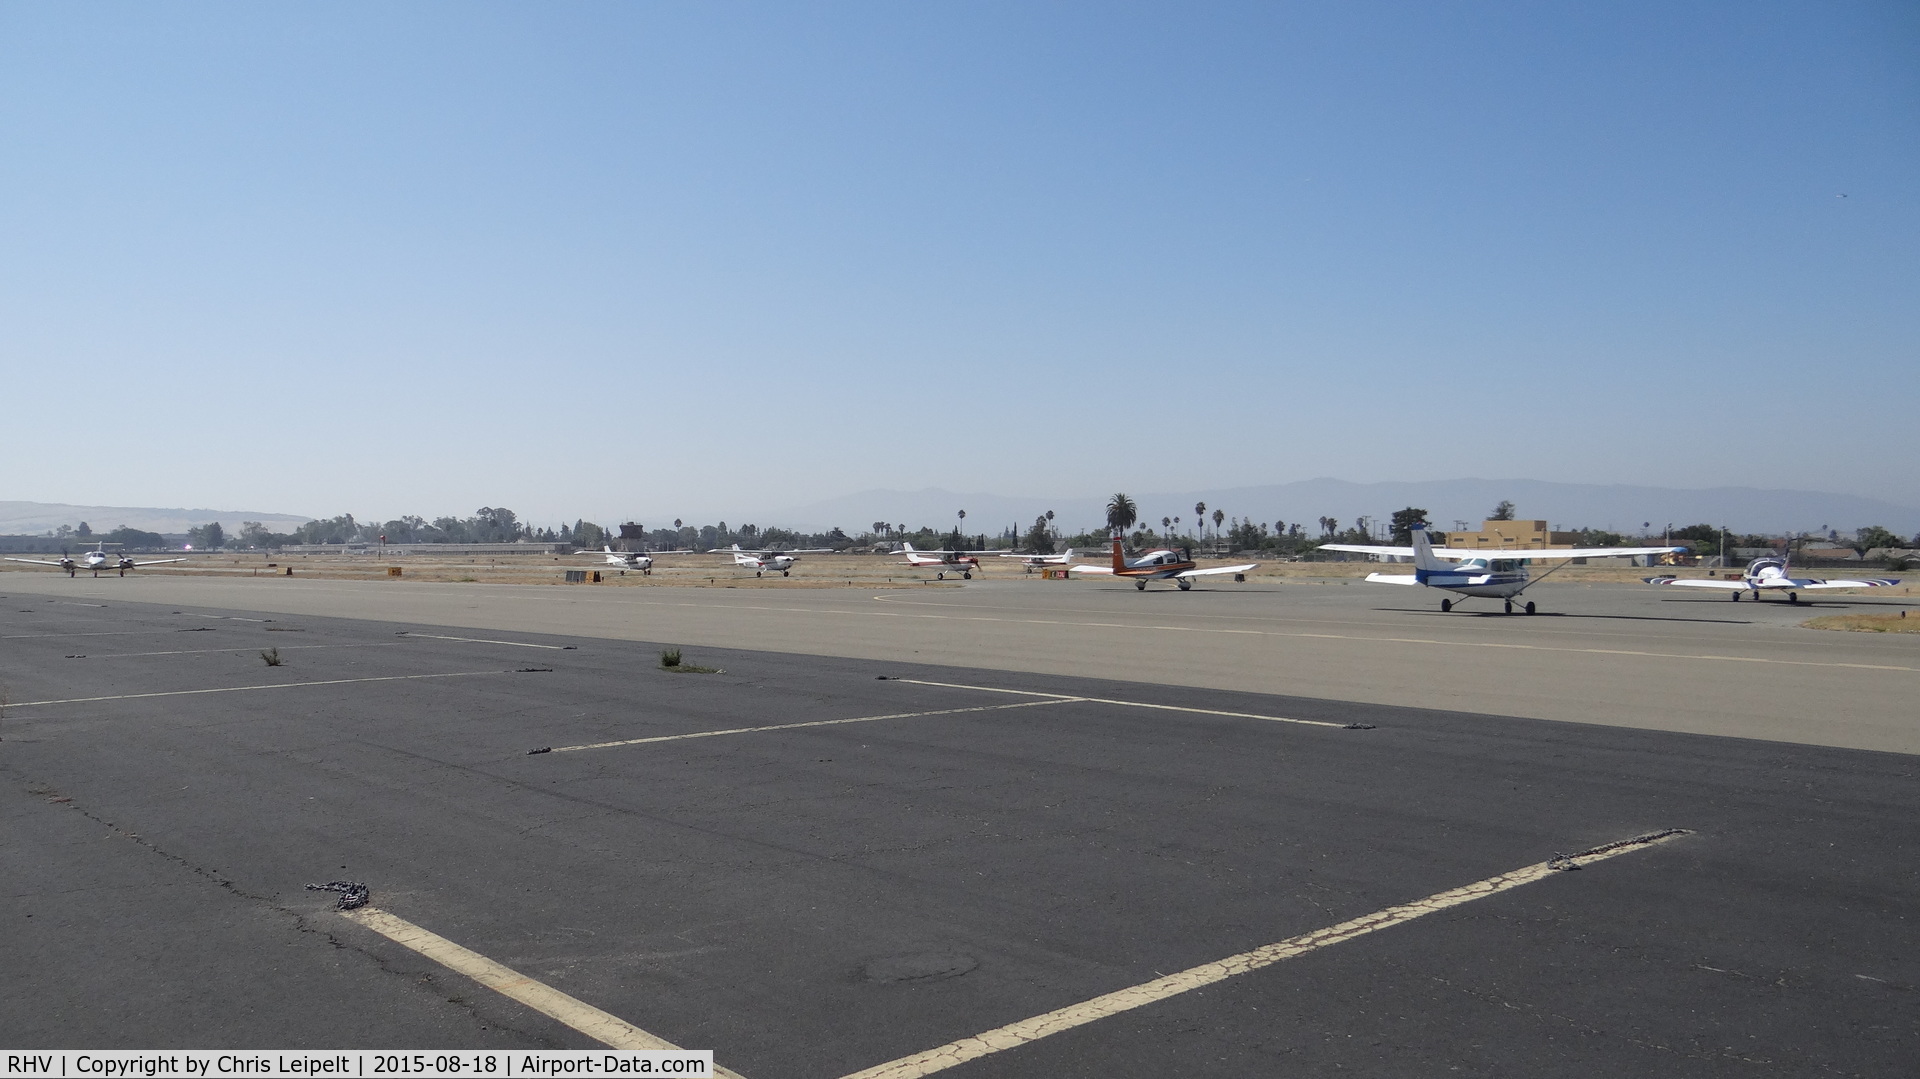 Reid-hillview Of Santa Clara County Airport (RHV) - The busiest run-up area ever at Reid Hillview Airport, San Jose, CA. No plane could get to the runway even if they weren't doing a run-up because of all the aircraft in the same small area! There was so event so I'm wondering why it was no busy.